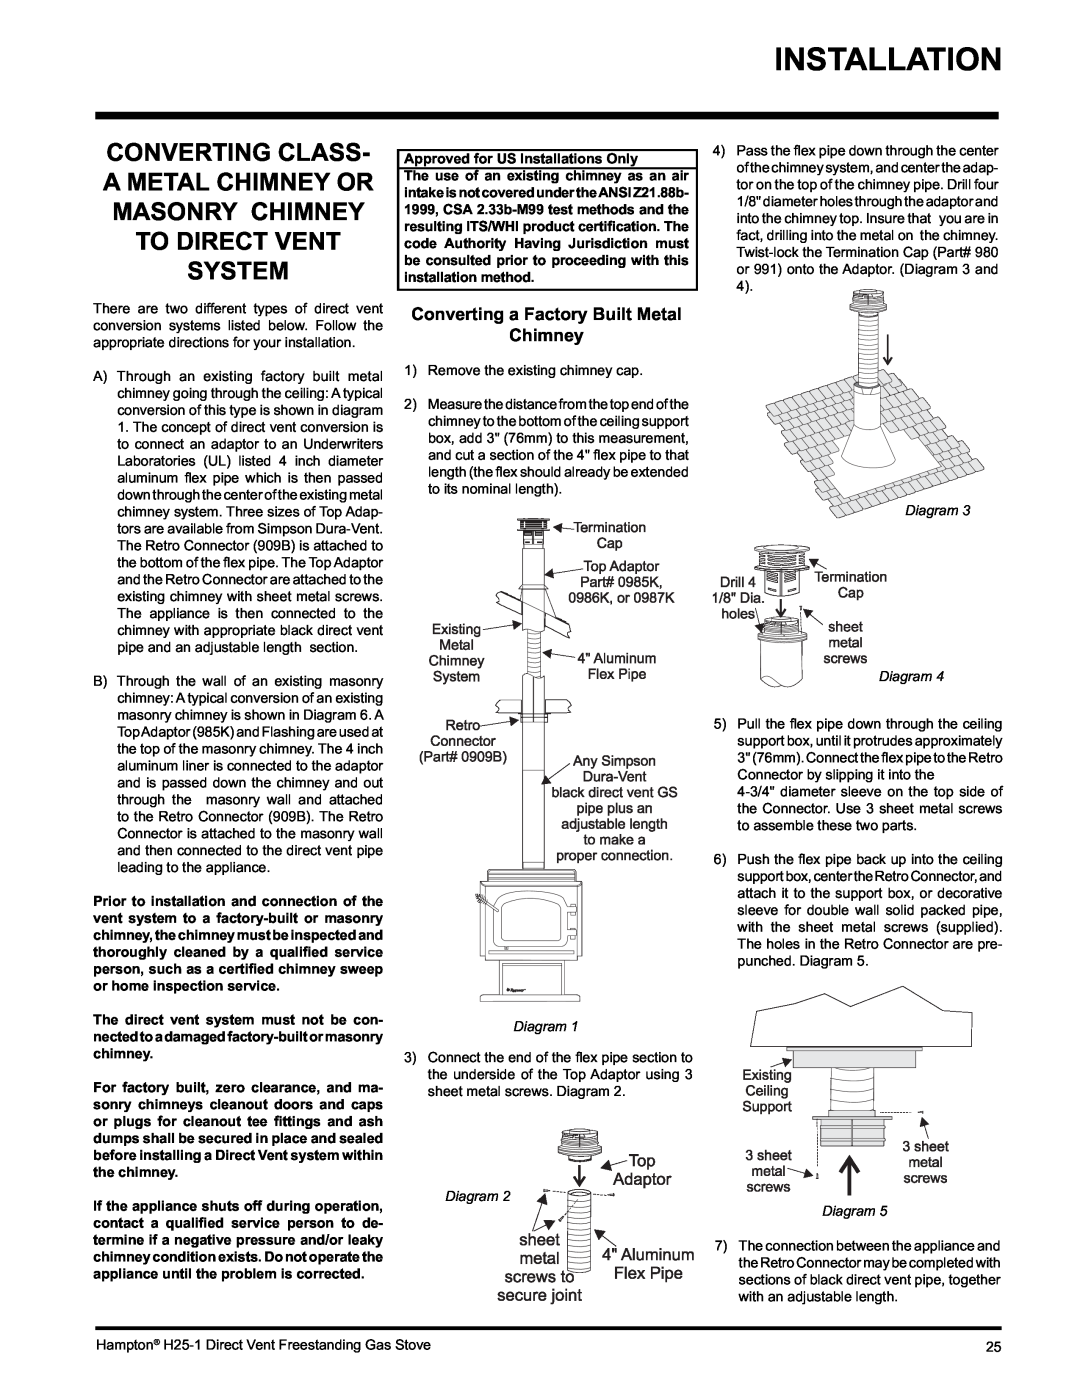 Hampton Direct H25-LP1, H25-NG1 installation manual Approved for US Installations Only, Diagram Diagram 